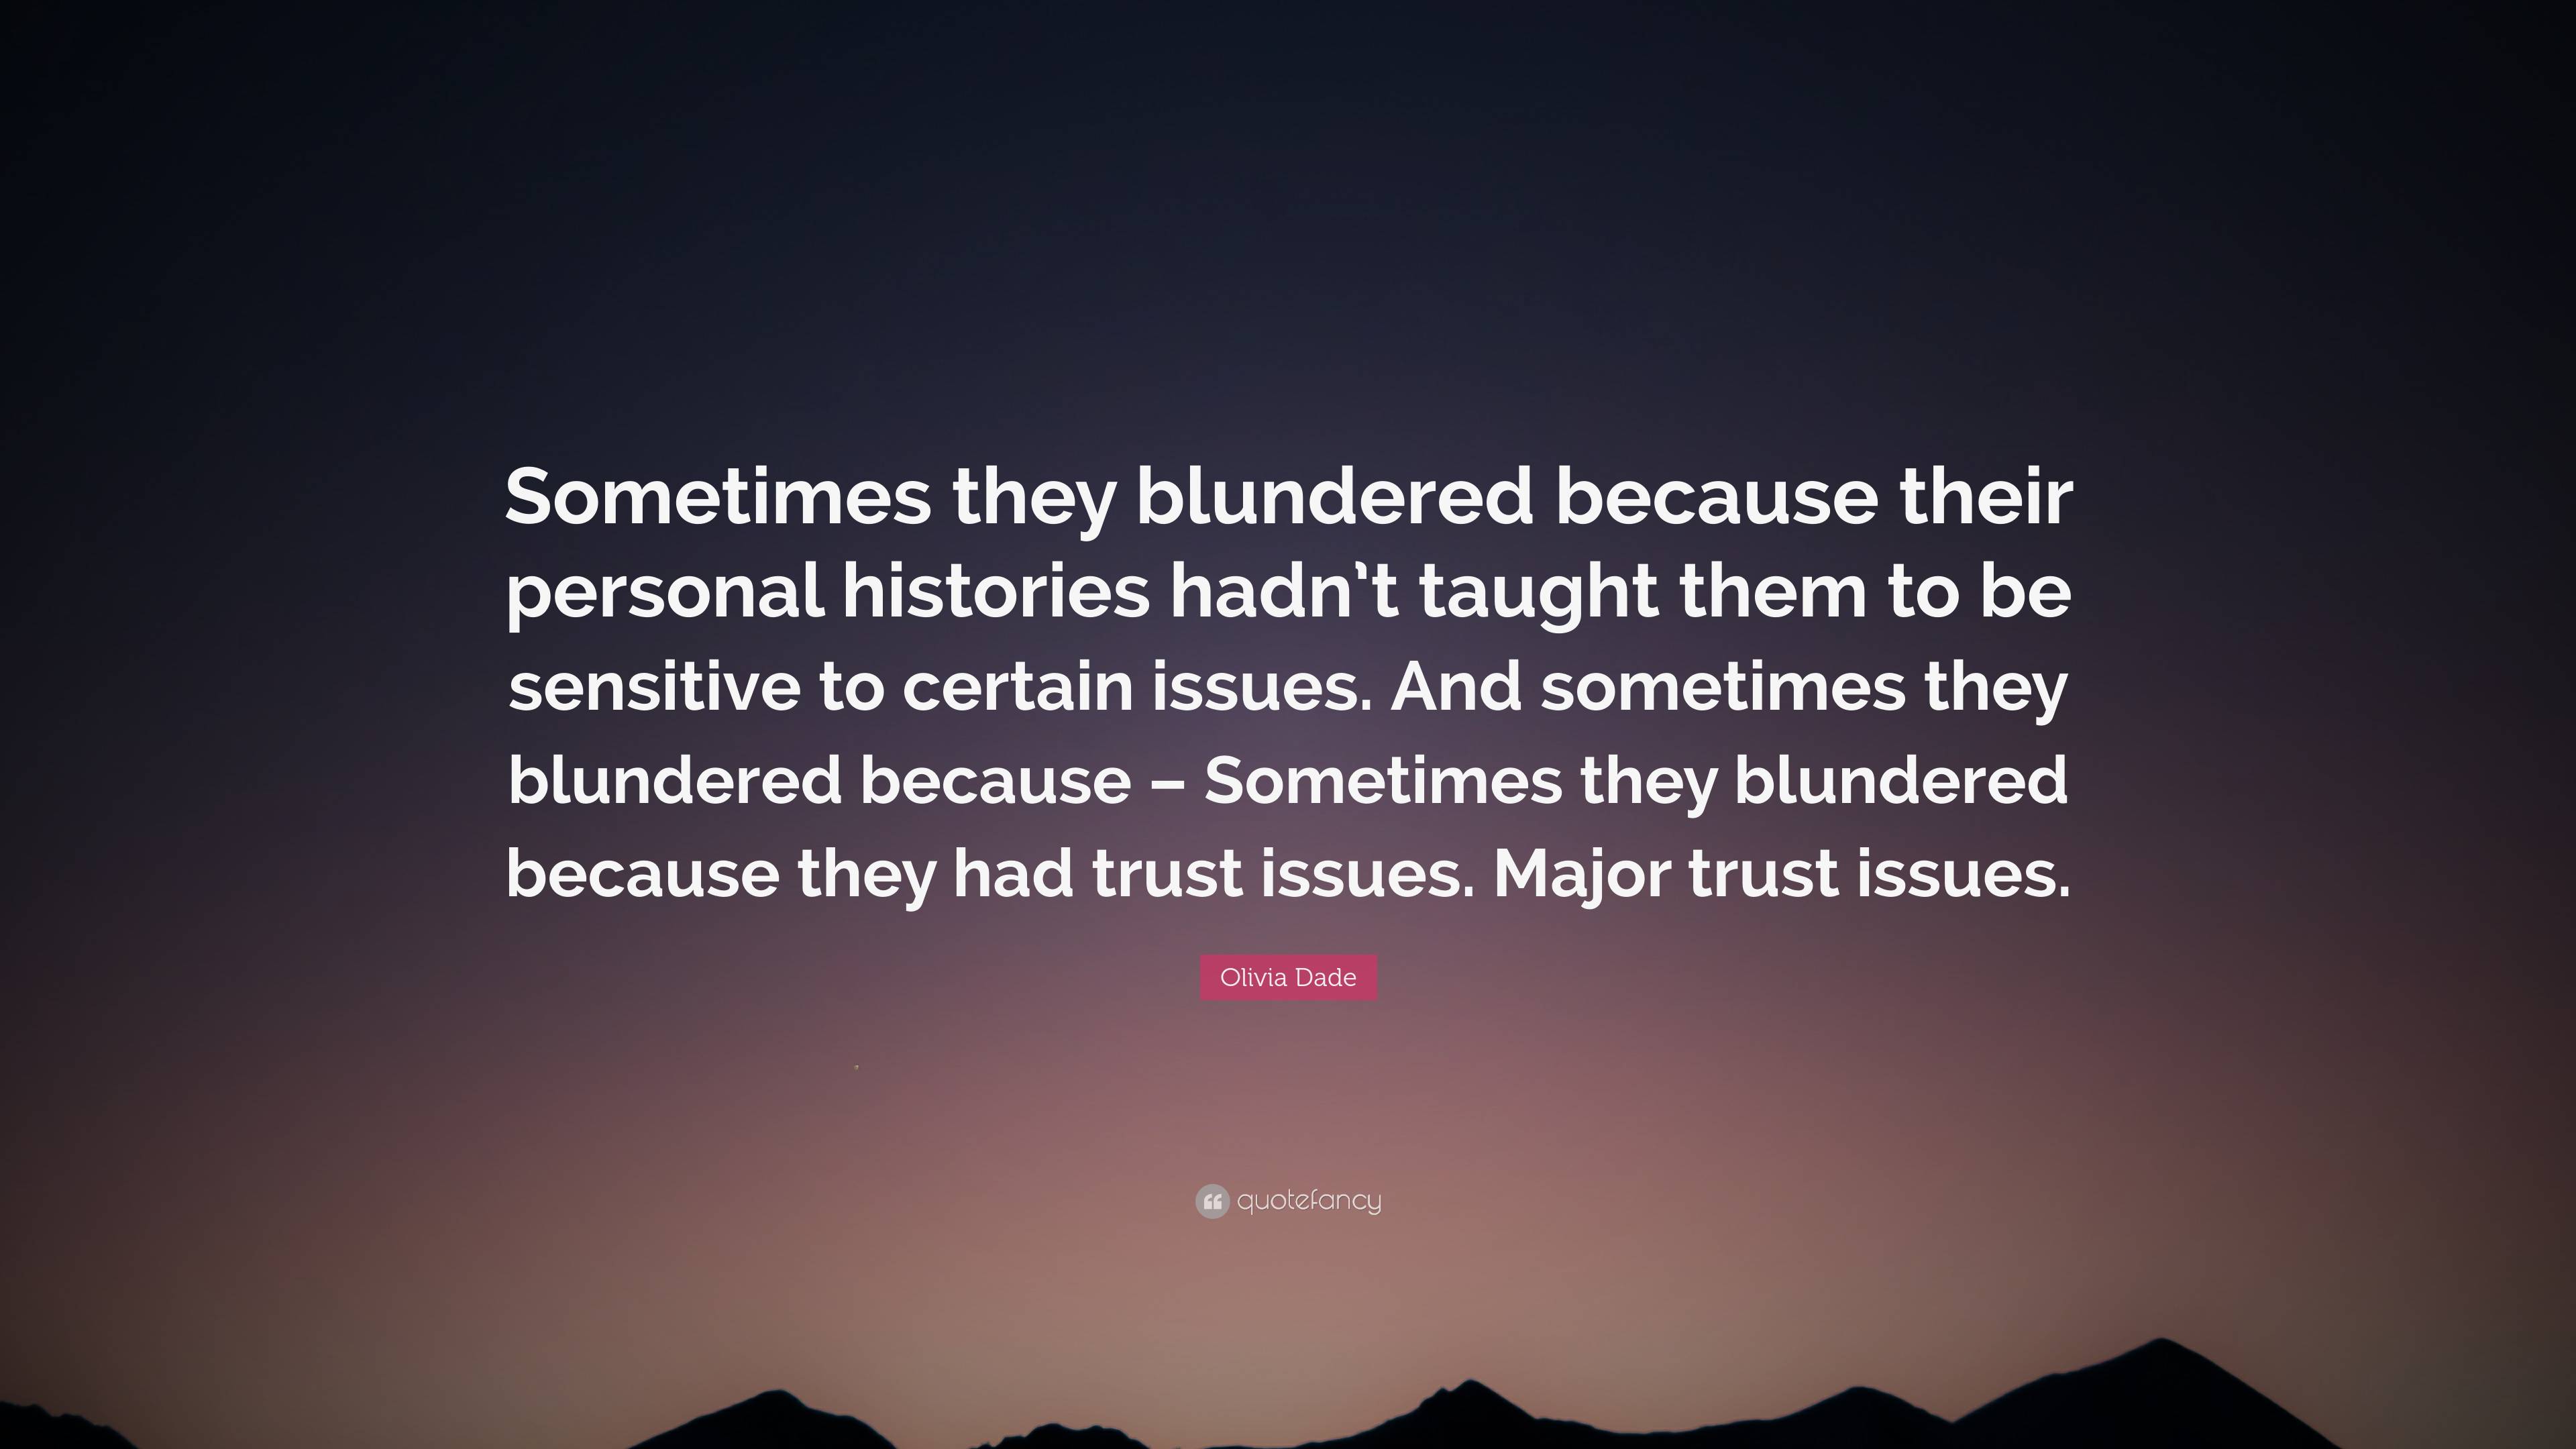 Olivia Dade Quote: “Sometimes they blundered because their personal  histories hadn't taught them to be sensitive to certain issues. And some”